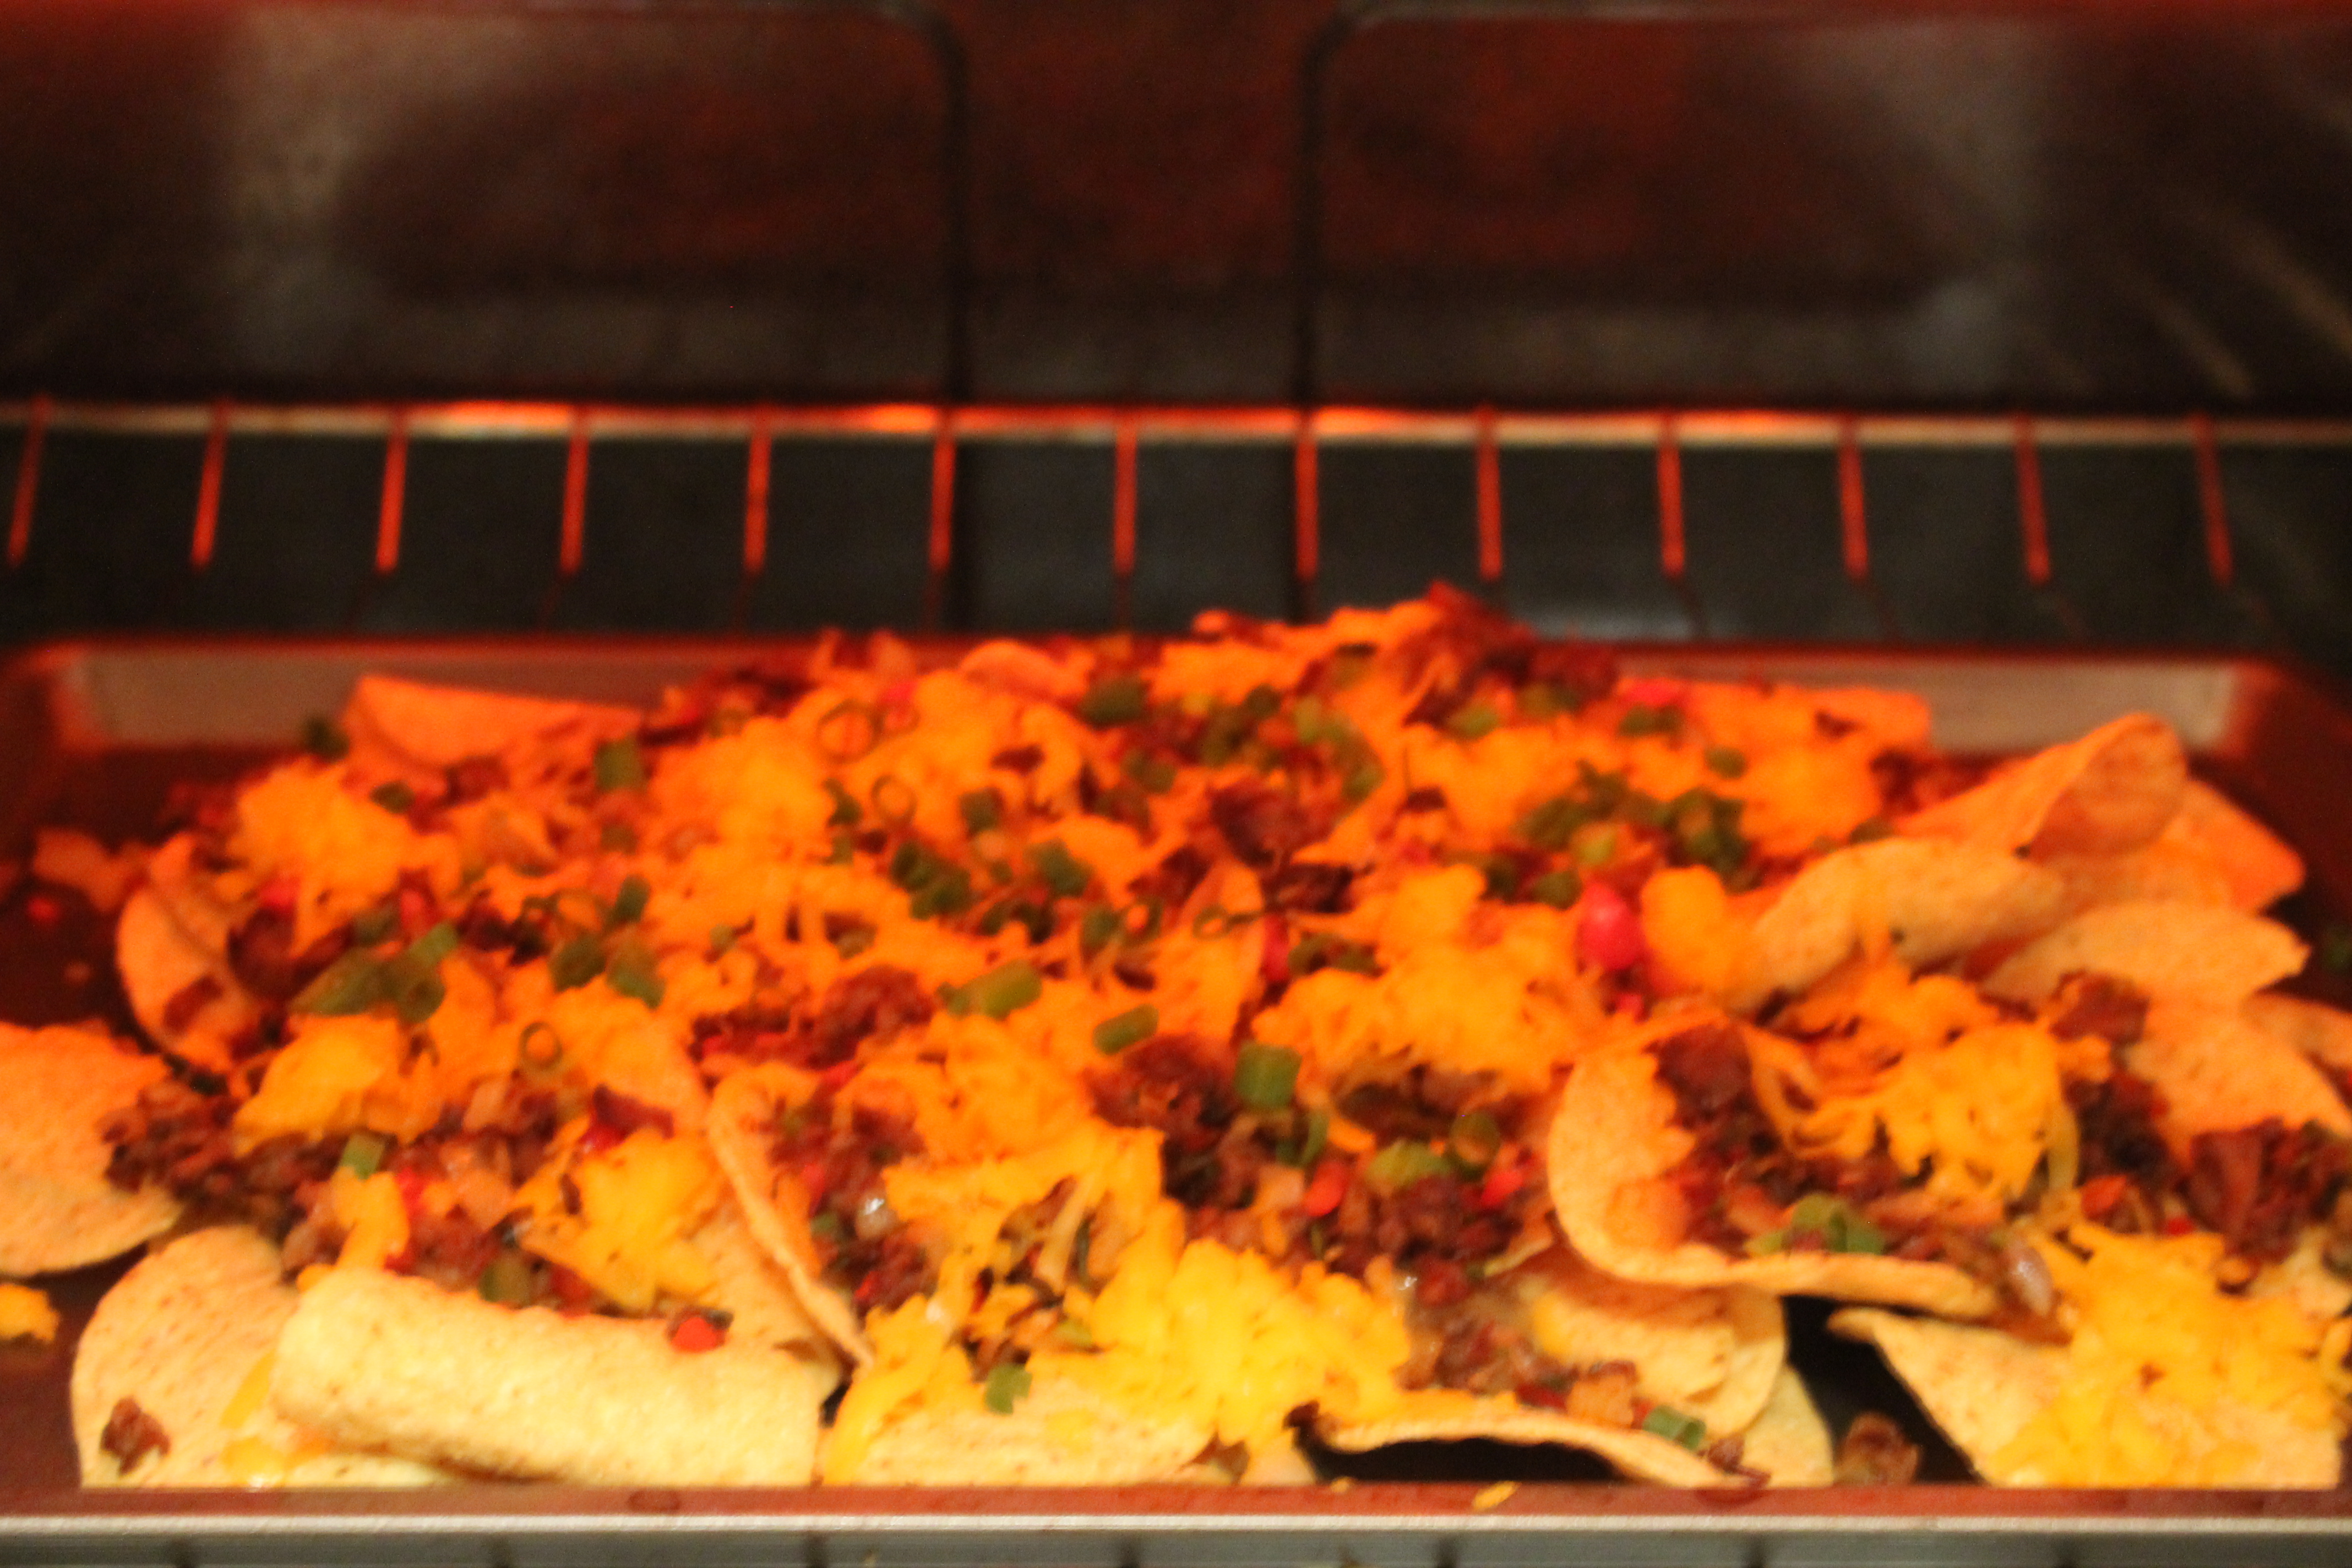 An image of a sheet pan of brisket nachos cooking in an oven until the cheese is melted and bubbling.